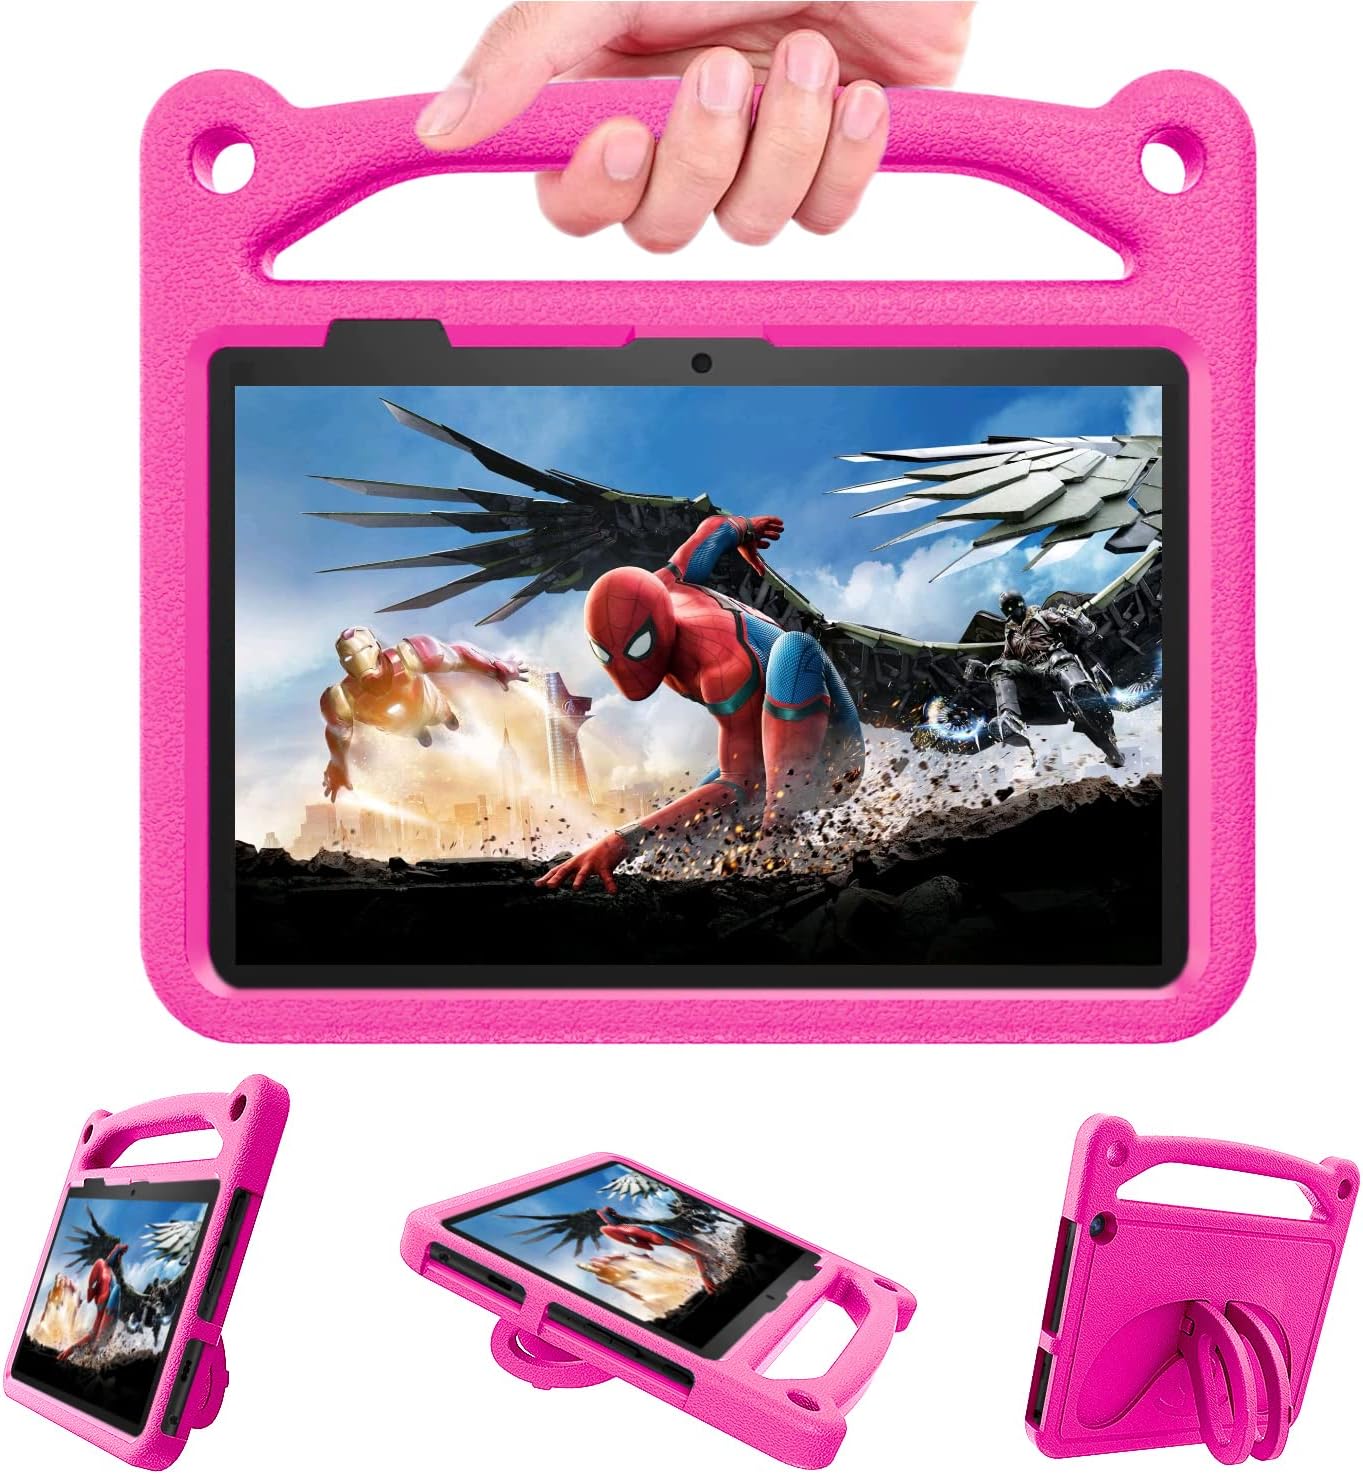 Fire 7 Tablet case for Kids Light Weight Shockproof Kid-Proof Protective Cover with Handle Built-in Foldable Kickstand for Amazon fire 7 Tablet,Rose